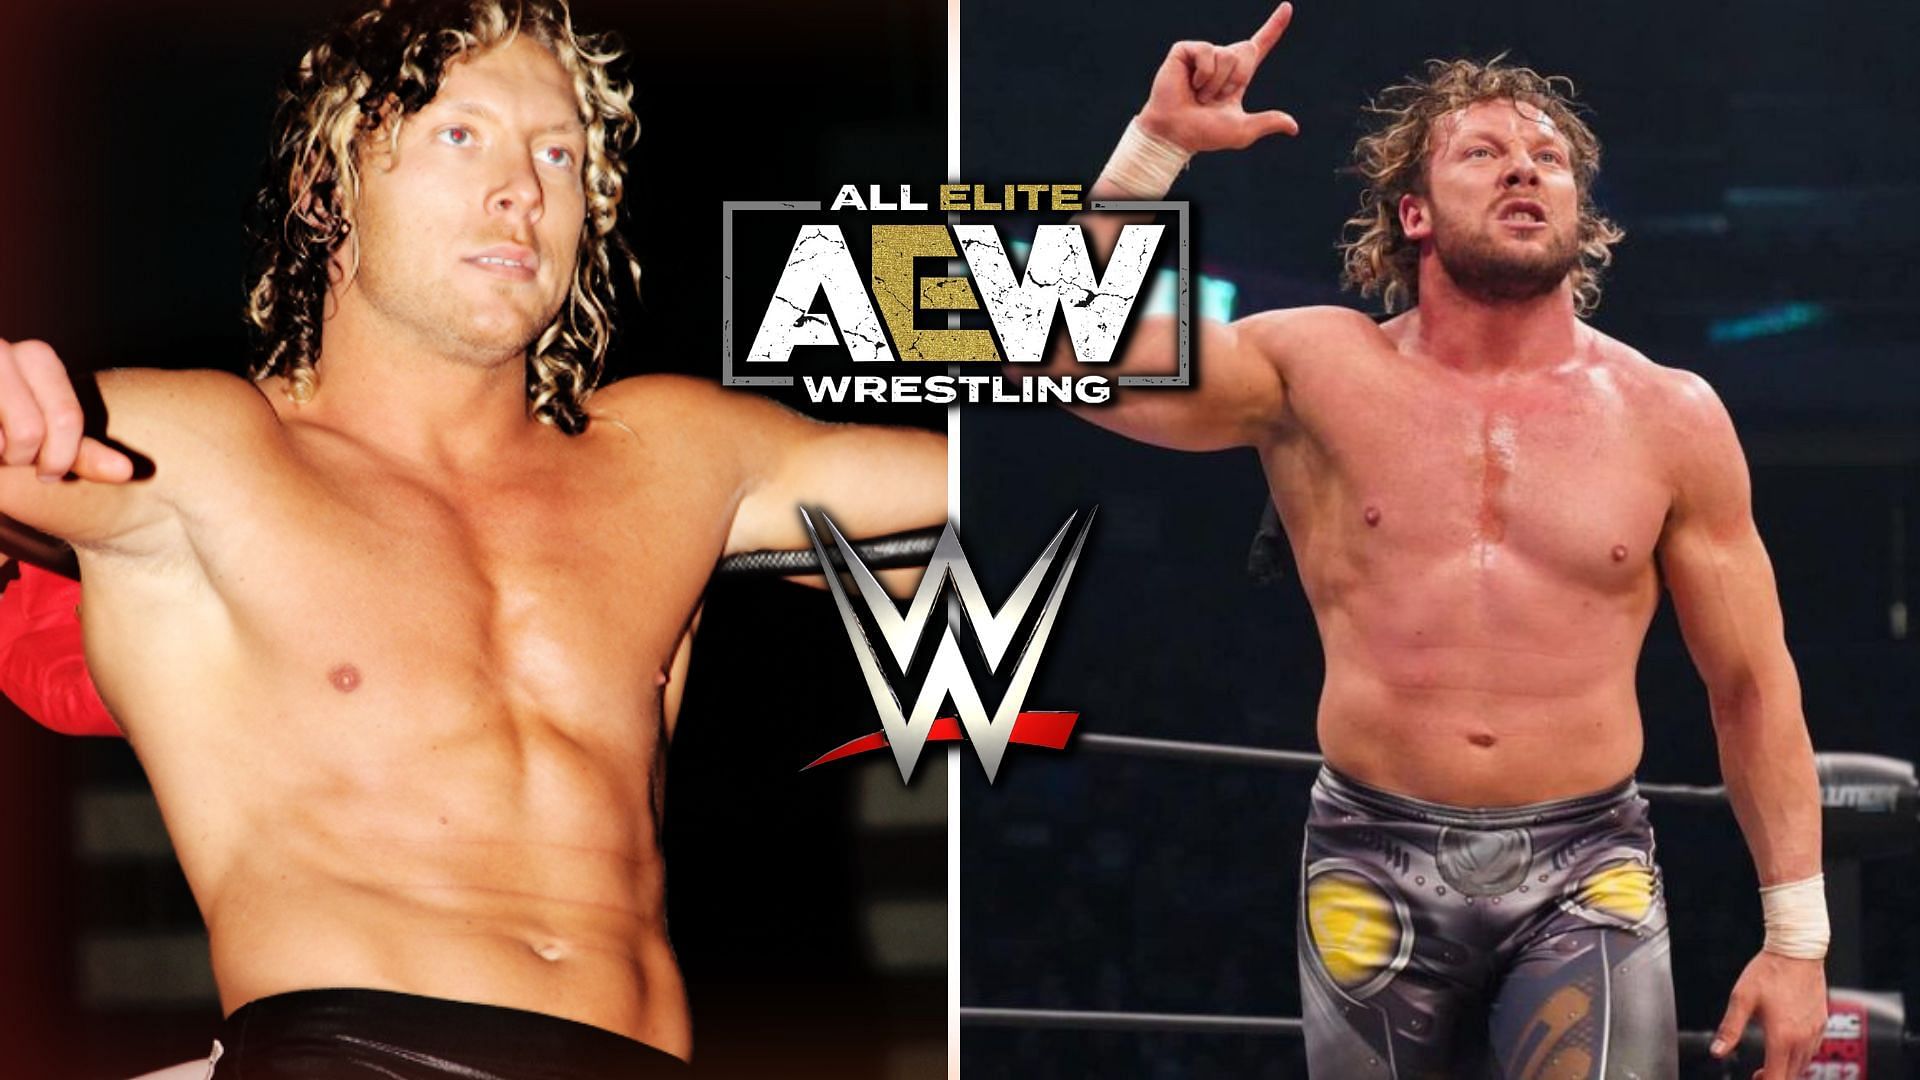 This WWE legend wants to wrestle AEW star Kenny Omega in a singles bout.